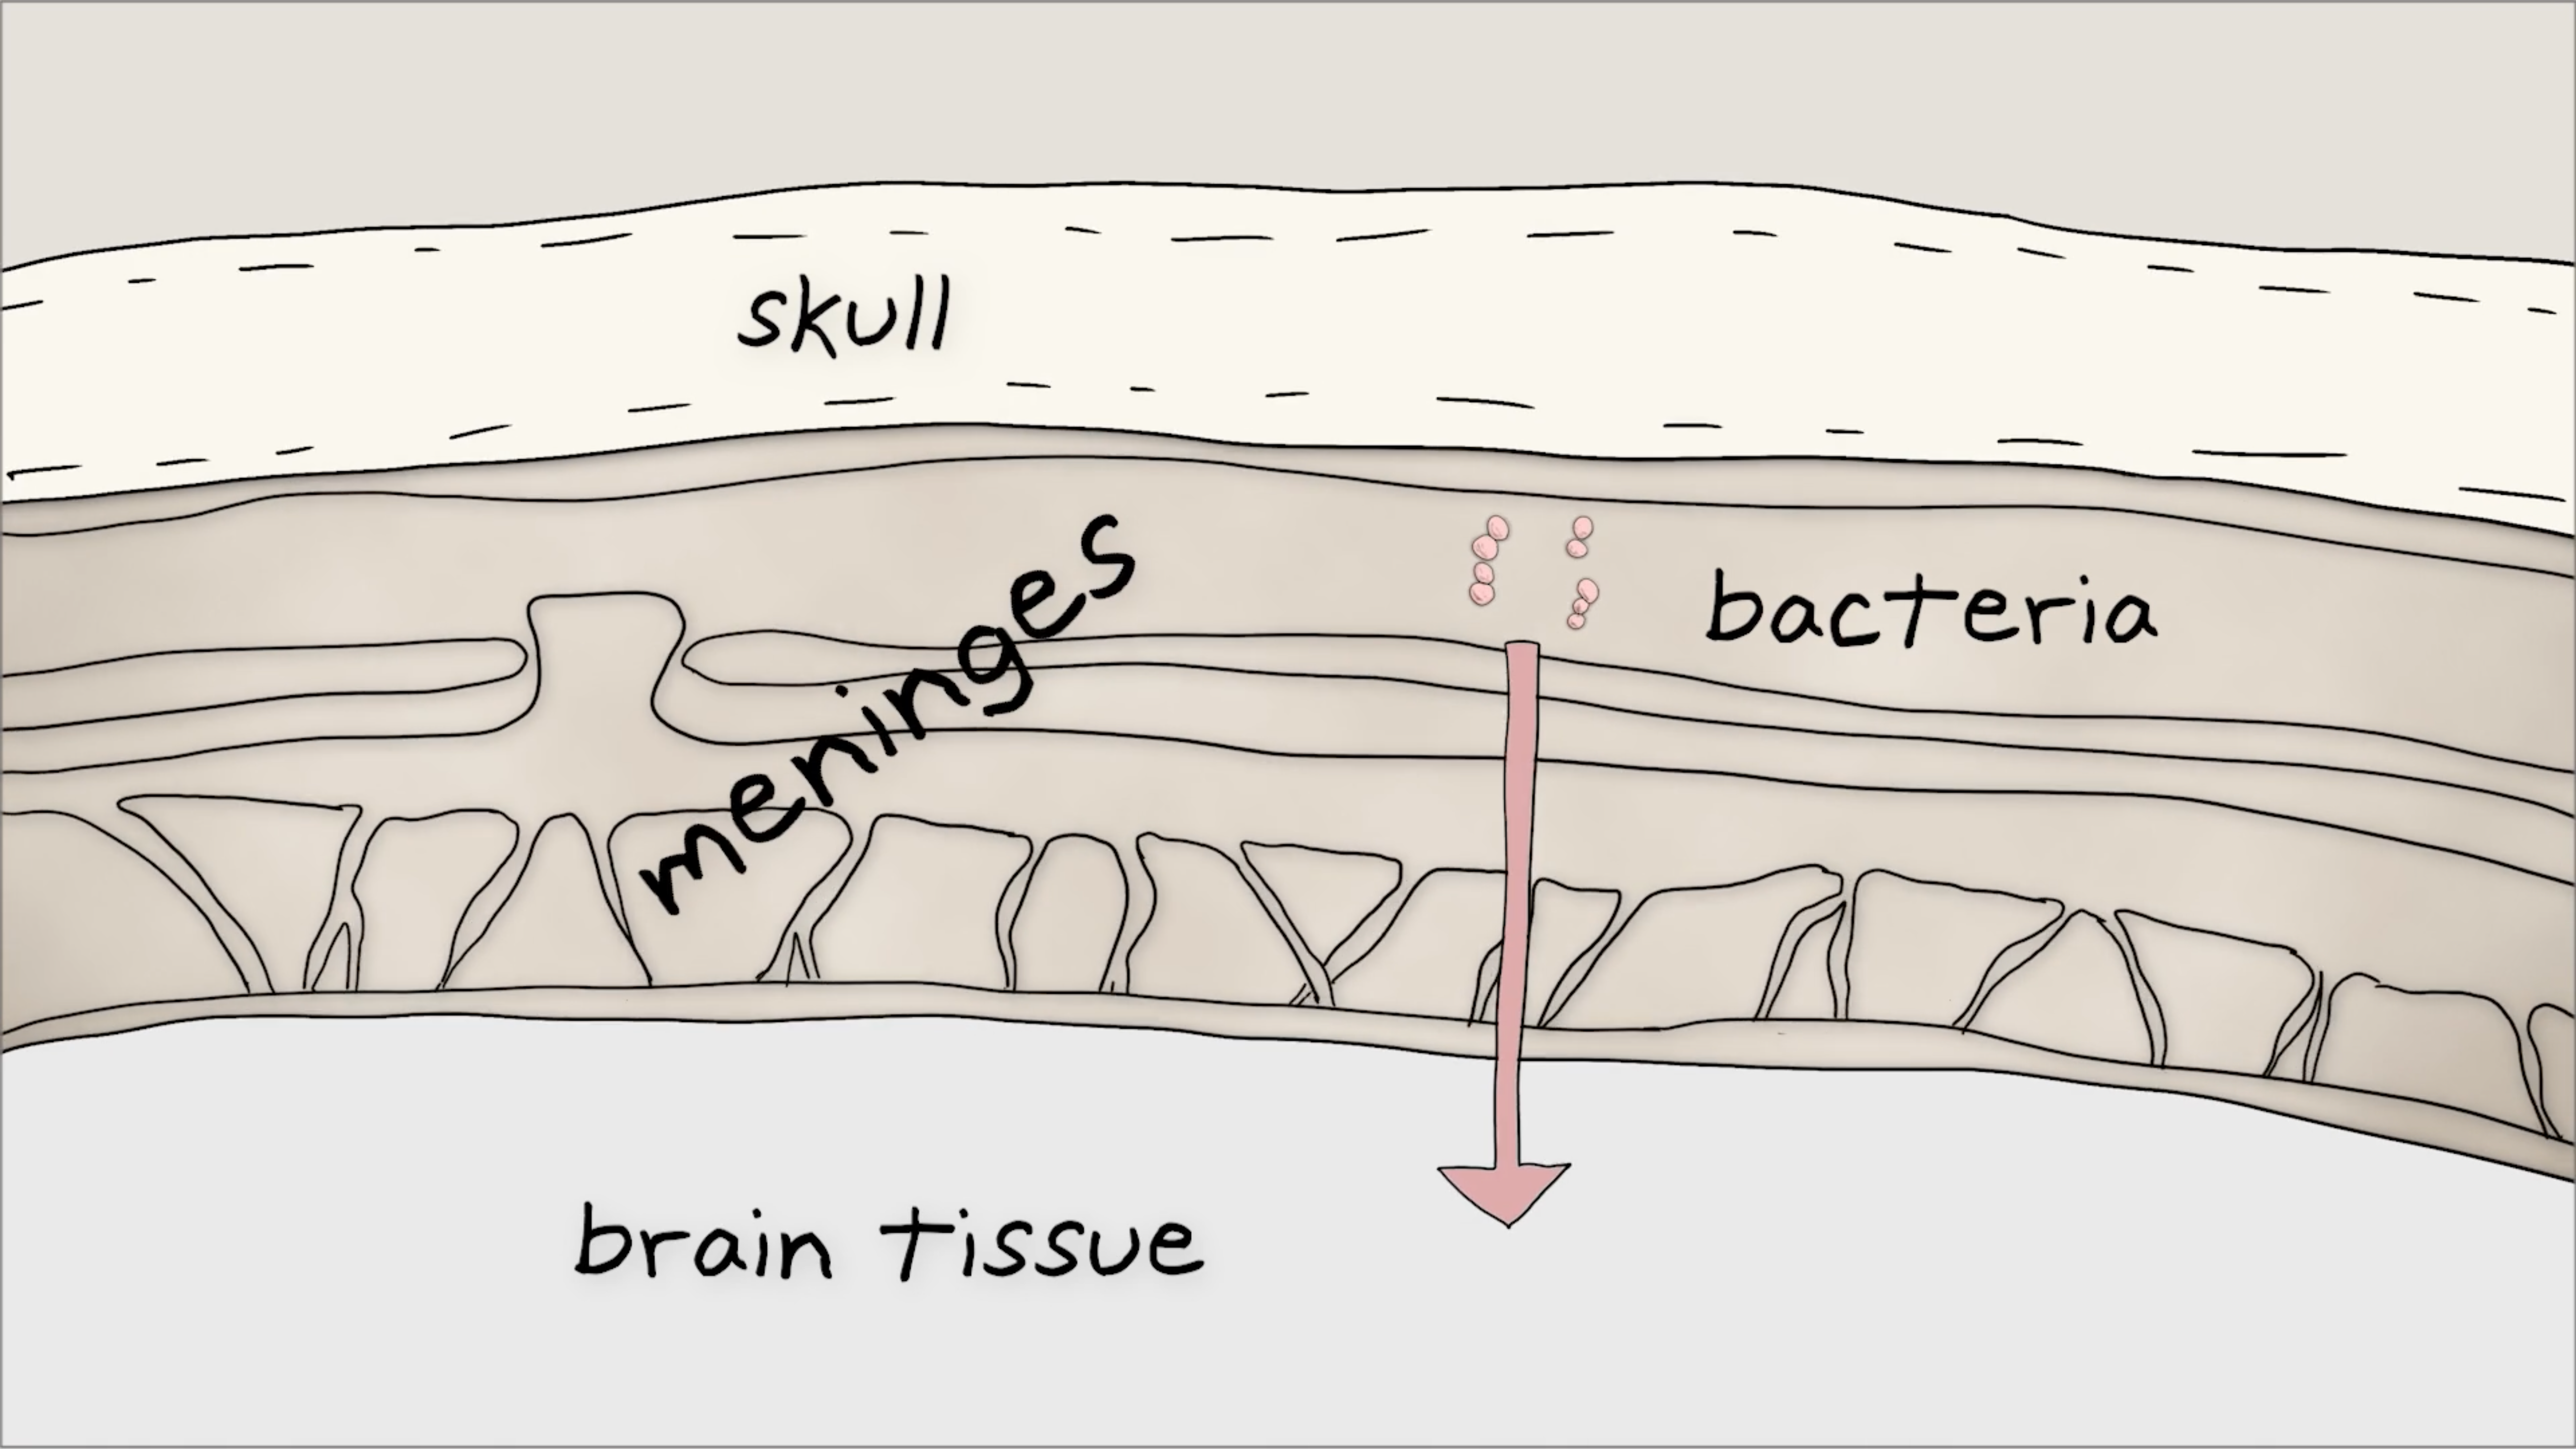 illustration of a cross-section of the skull, with layers labeled "skull" (top), "meninges" (middle), and "brain tissue" (bottom). dots labeled "bacteria" are shown moving from the meninges into the brain with a directional arrow